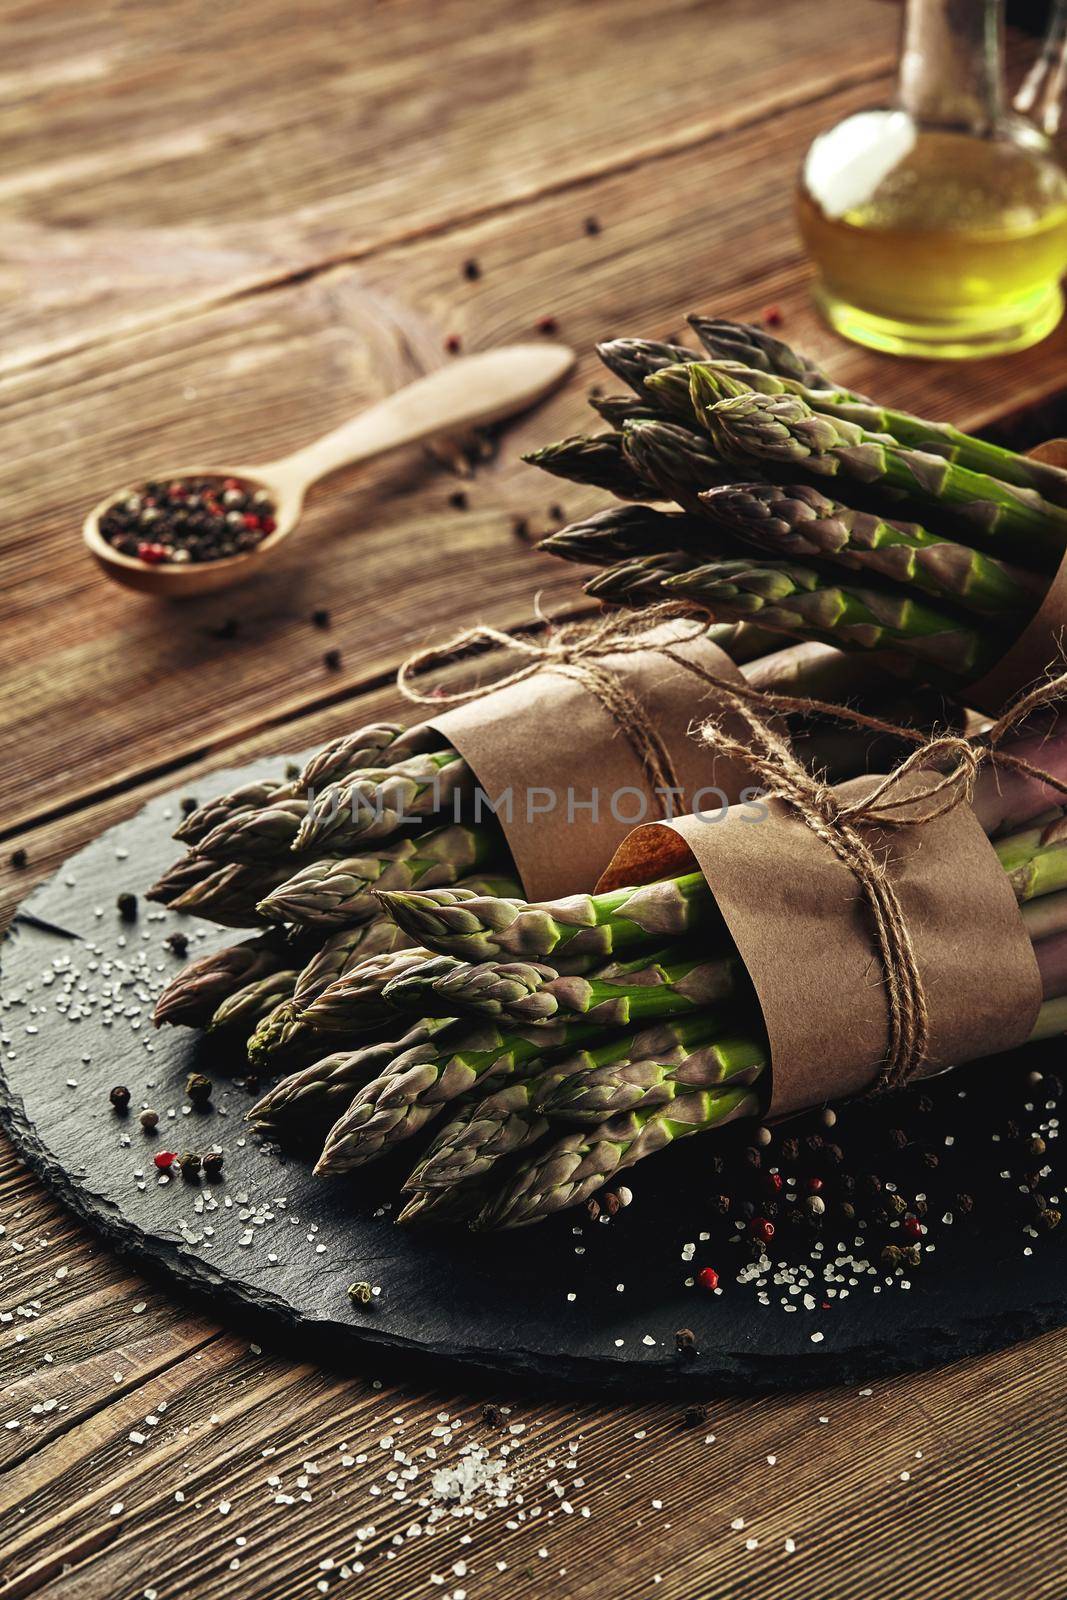 Bunches of an edible, organic stalks of asparagus on a stone slate, wooden background. Fresh, green vegetables with olive oil and seasonings, wooden spoon, top view. Healthy meal. Fall harvest, agricultural farming concept.